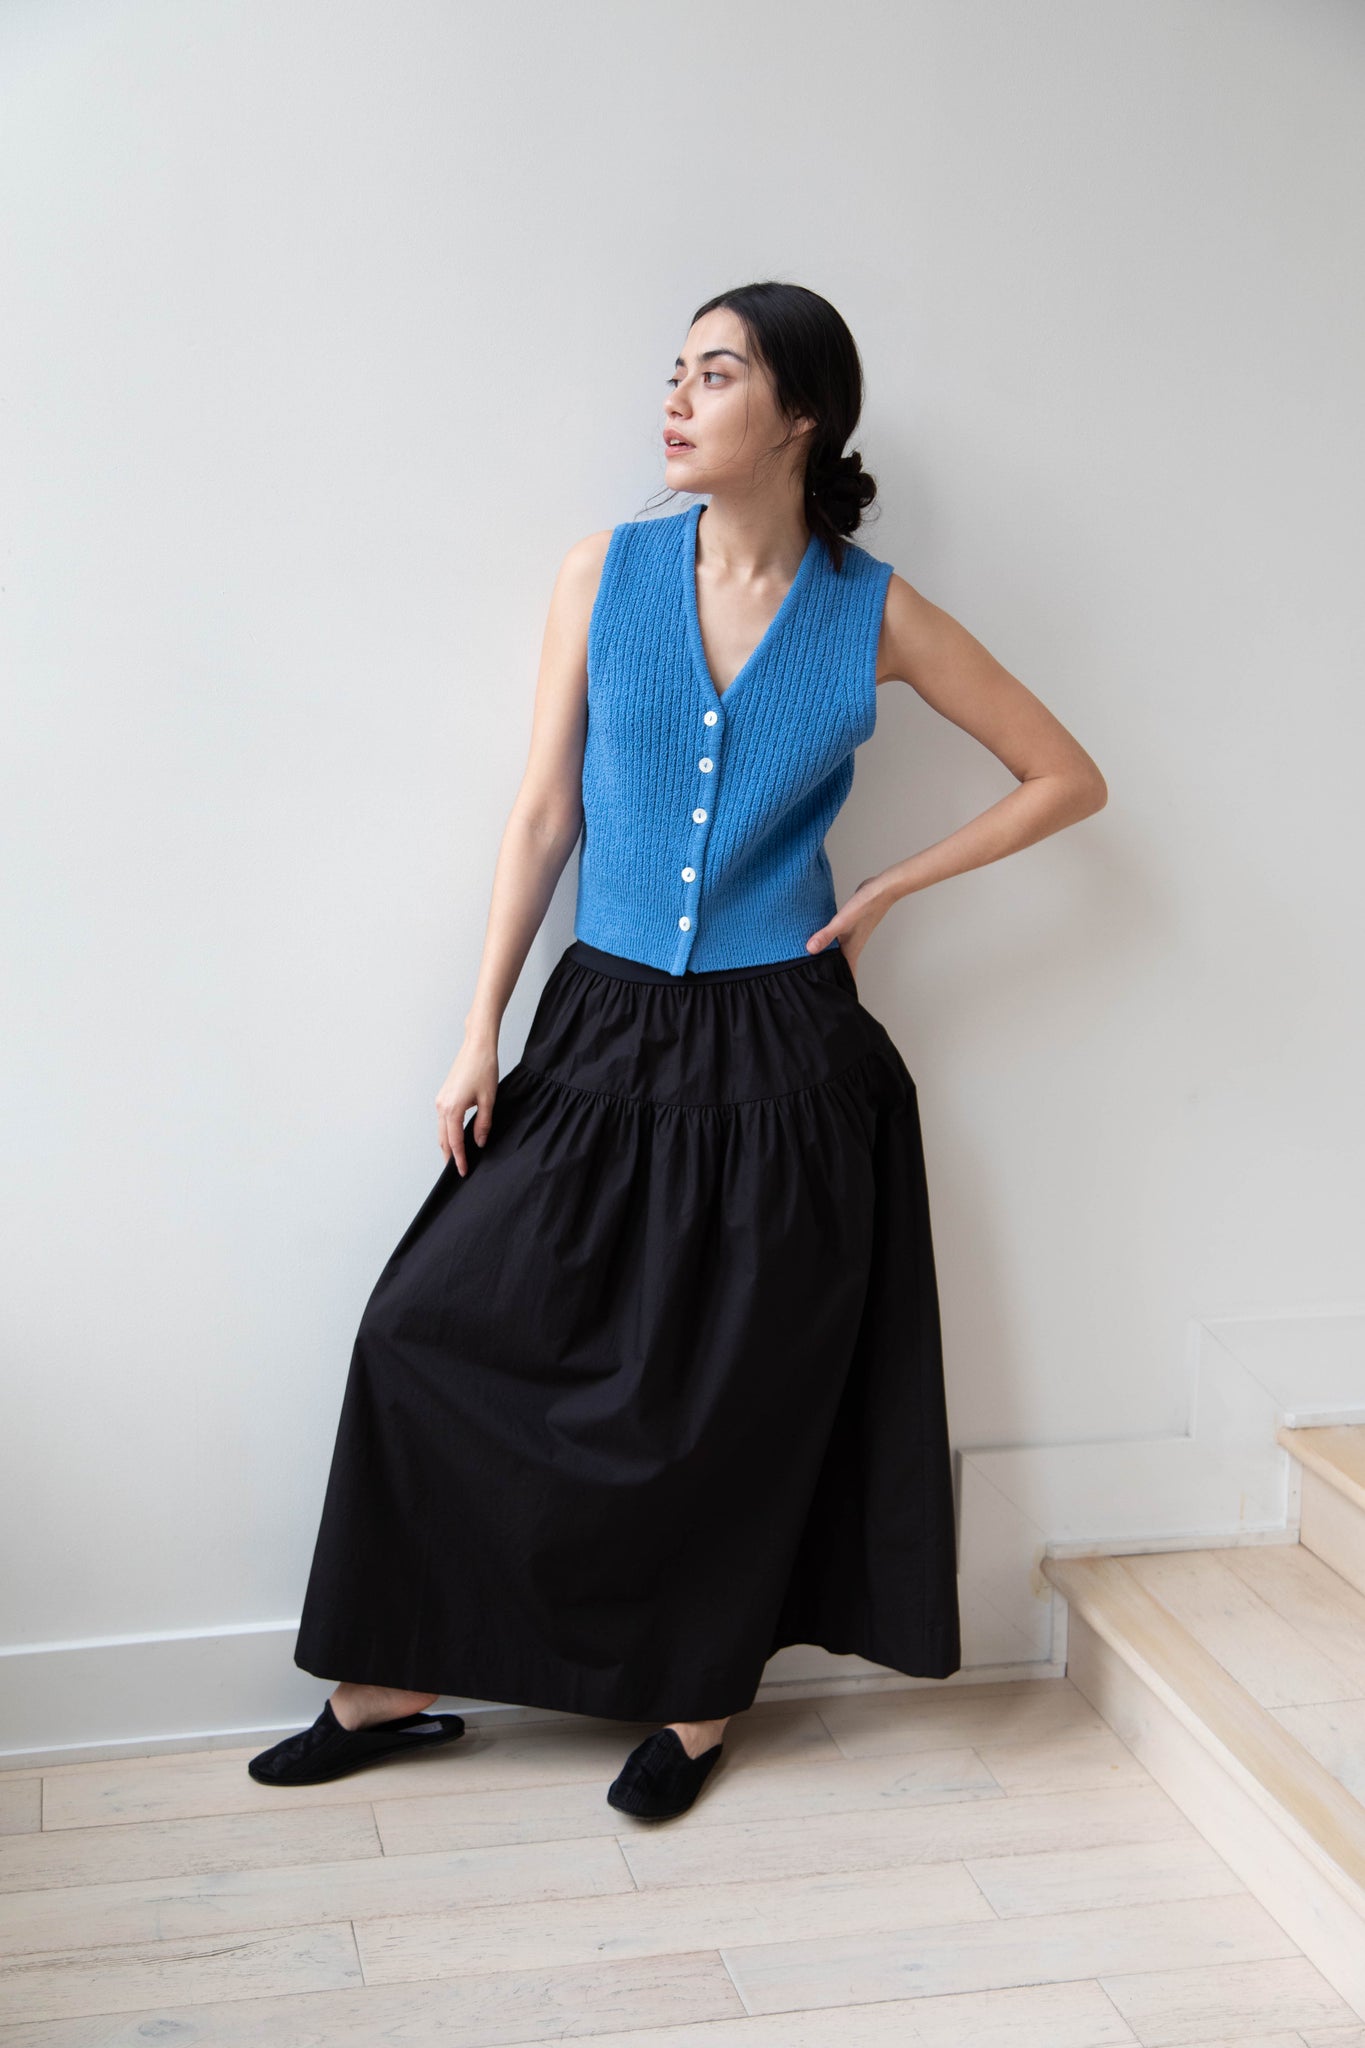 The Loom Gather Skirt in Black